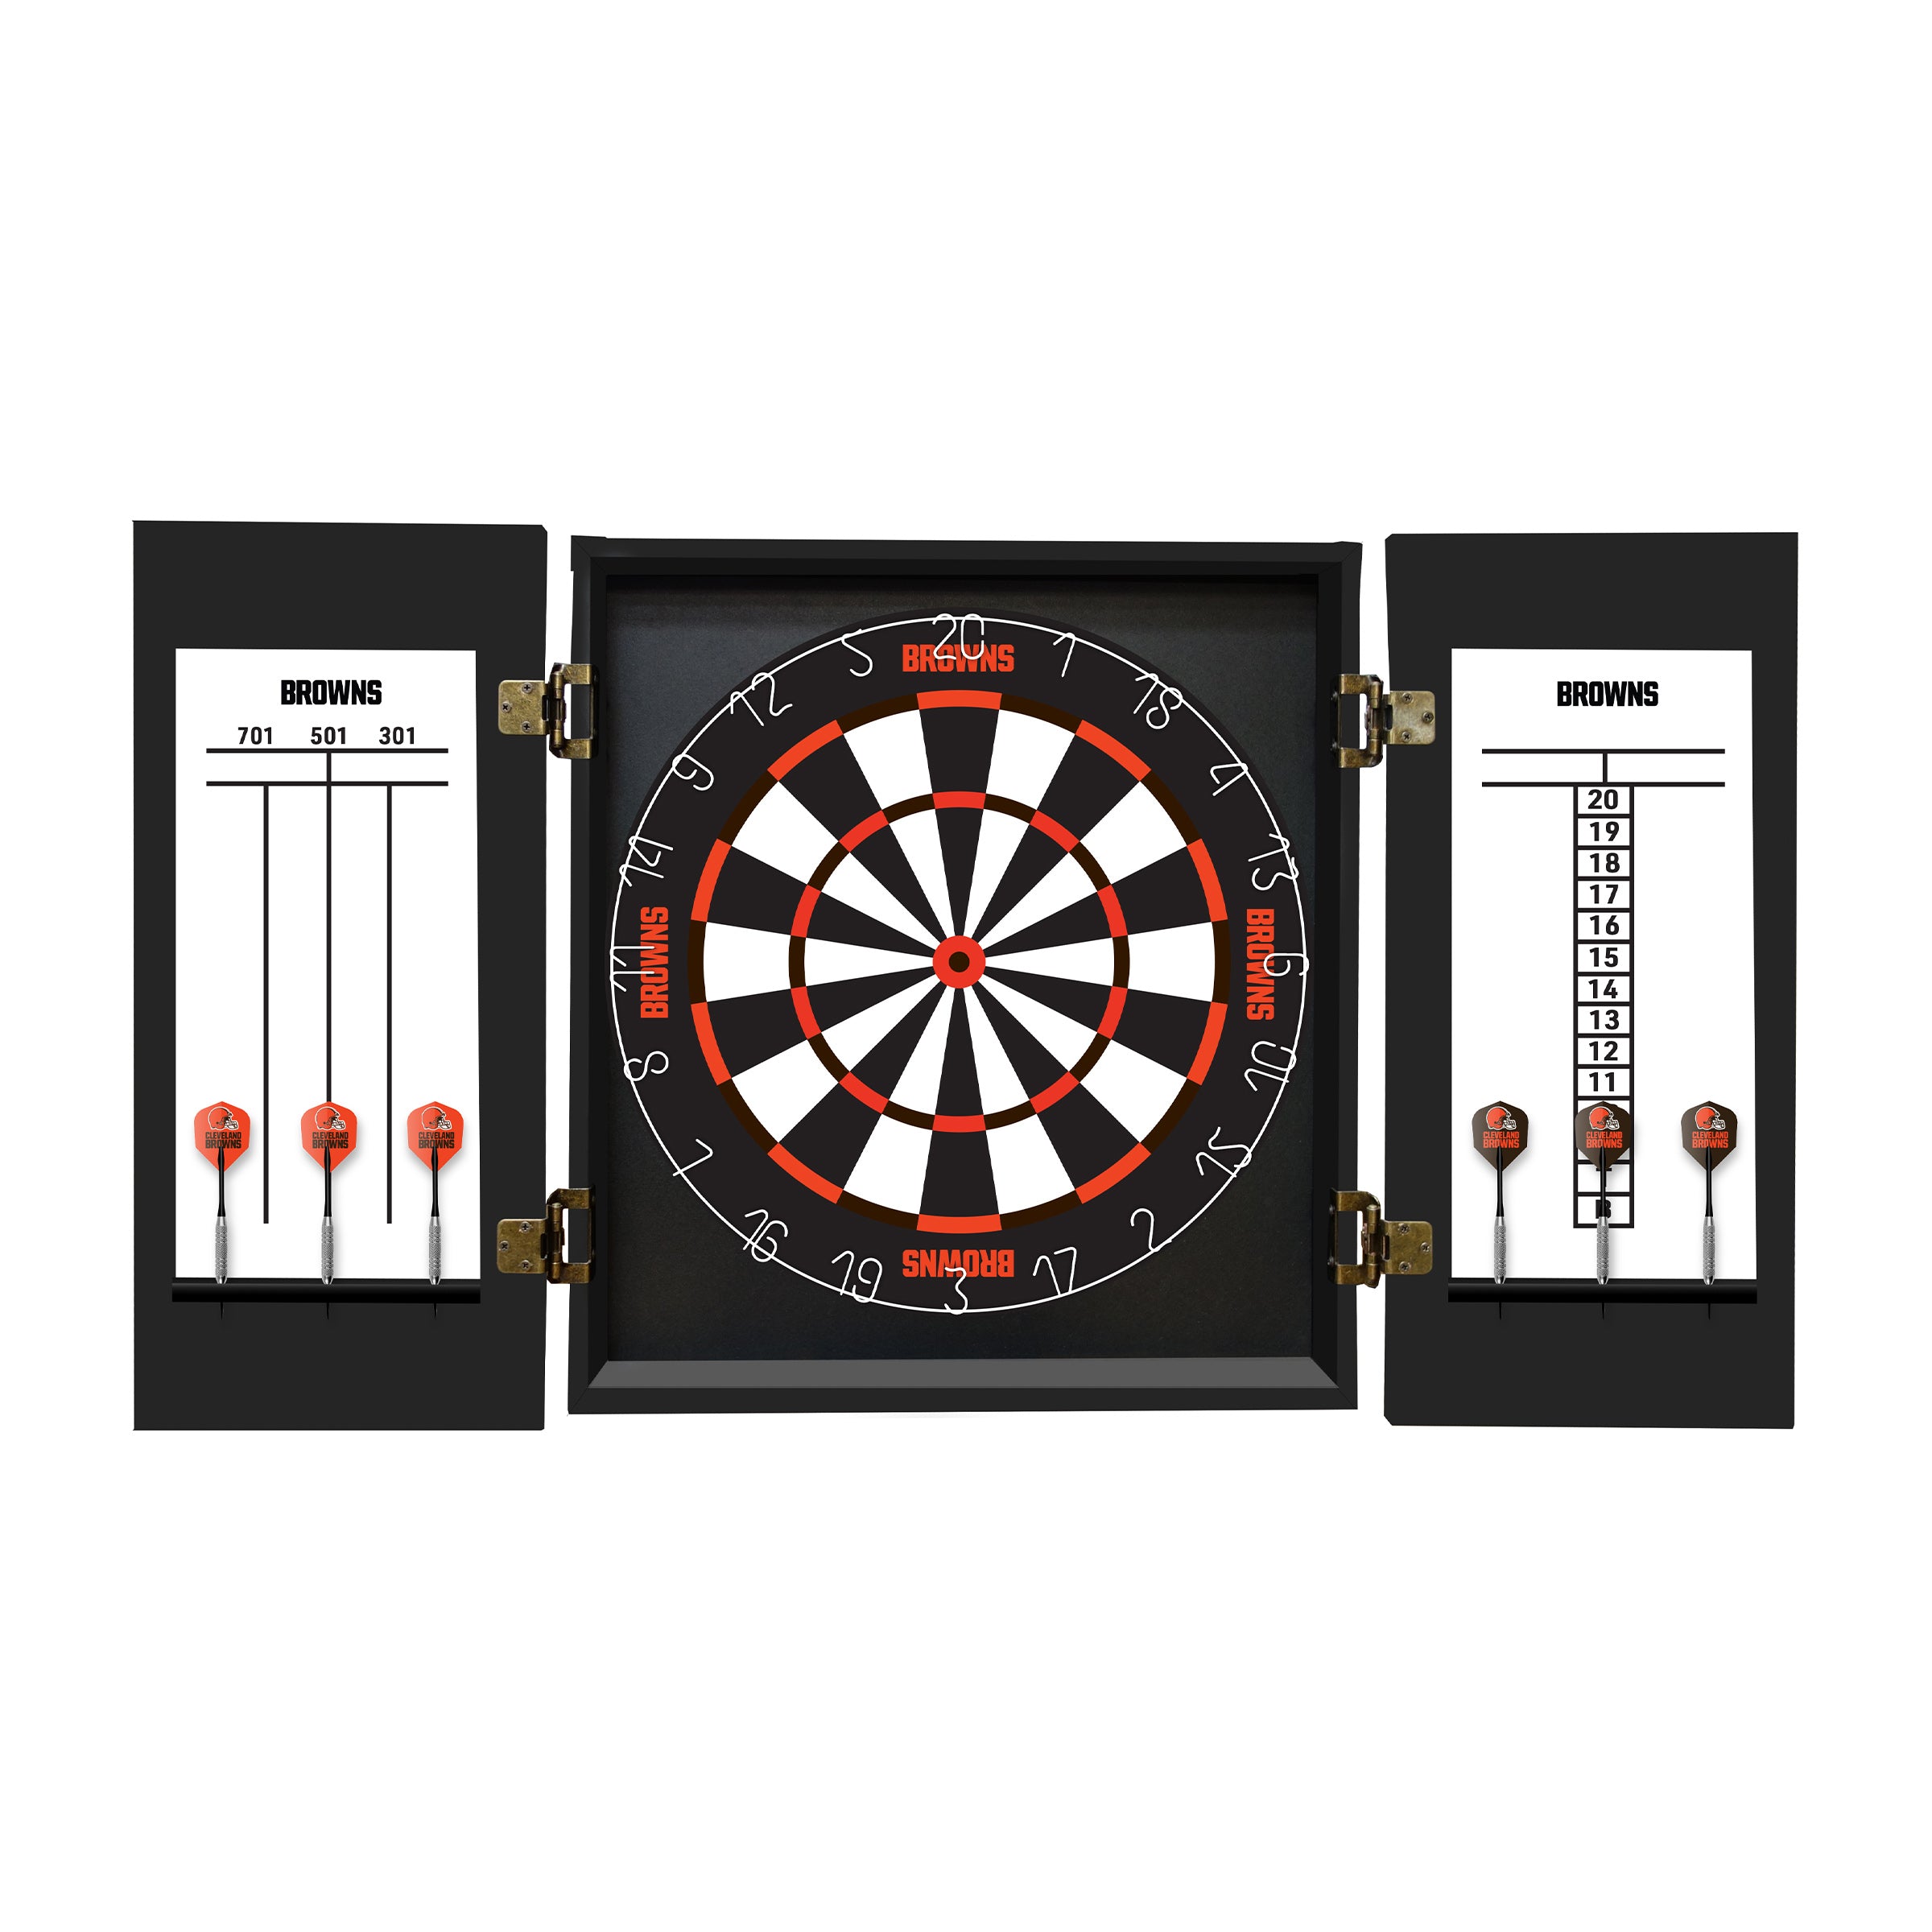 Imperial Cleveland Browns Fan's Choice Dartboard Set